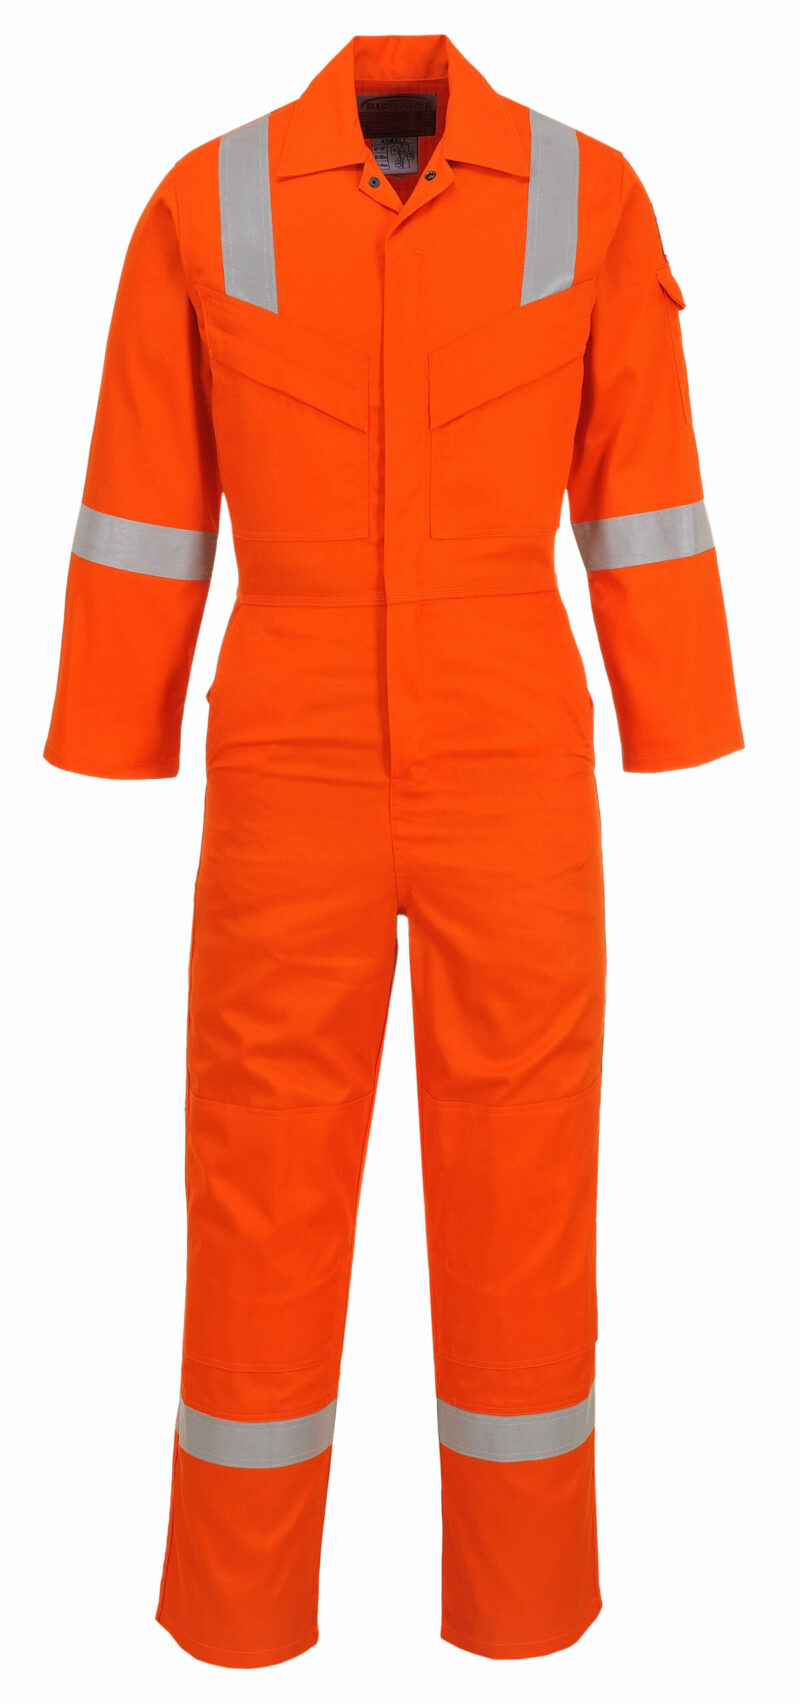 Portwest FR21 Super Light Weight Anti-Static Flame Retardant Coverall-17122